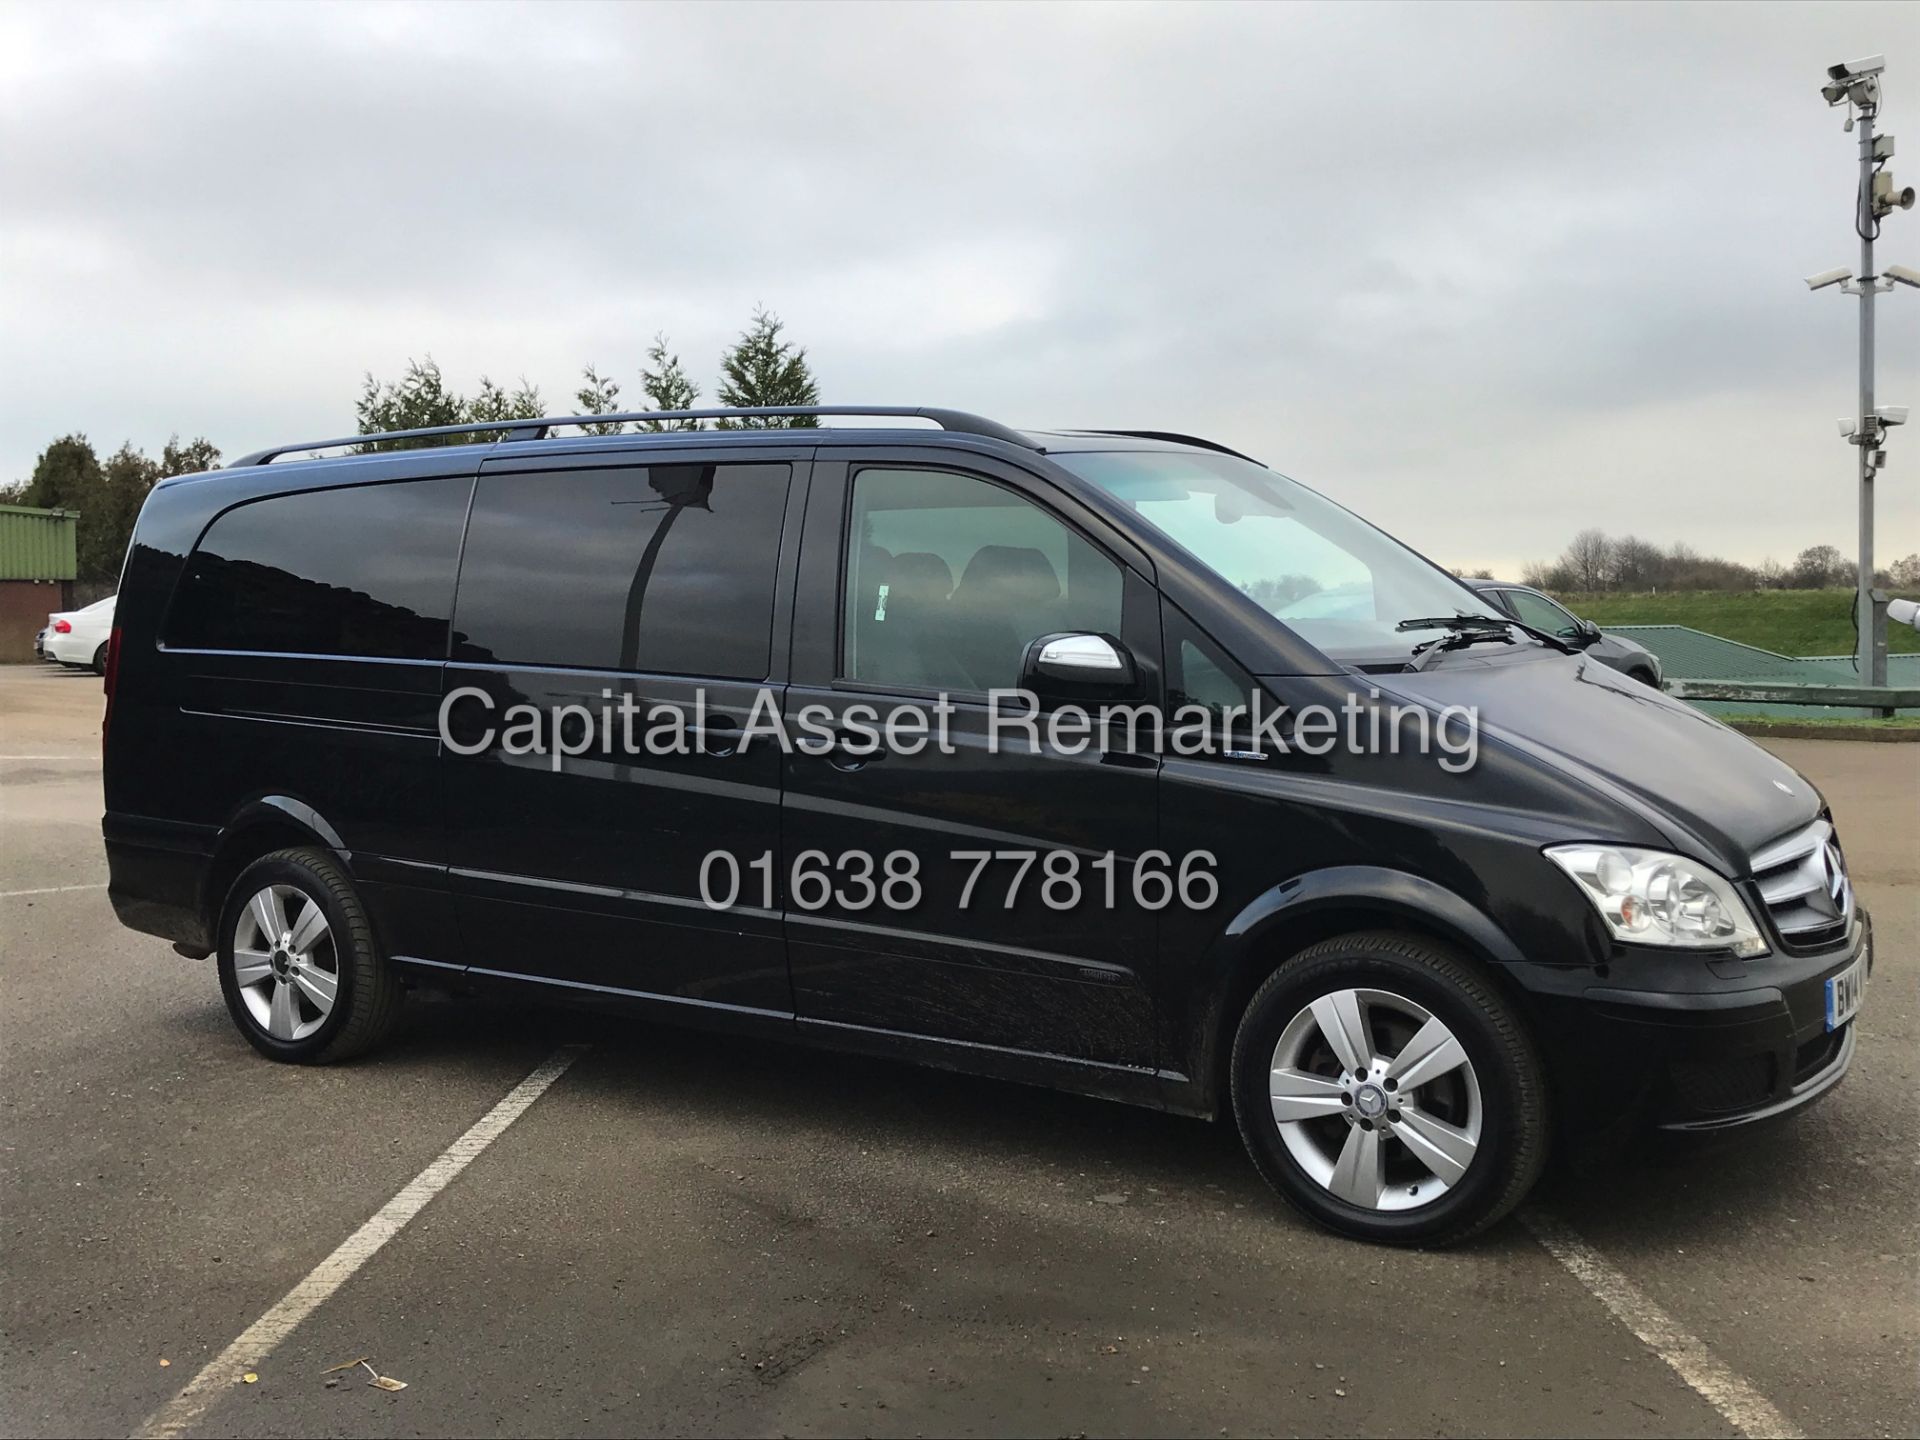 (ON SALE) MERCEDES VIANO 2.2CDI "AMBIENET" XLWB 8 SEATER (14 REG) 1 OWNER - FULLY LOADED - LEATHER - Image 7 of 28